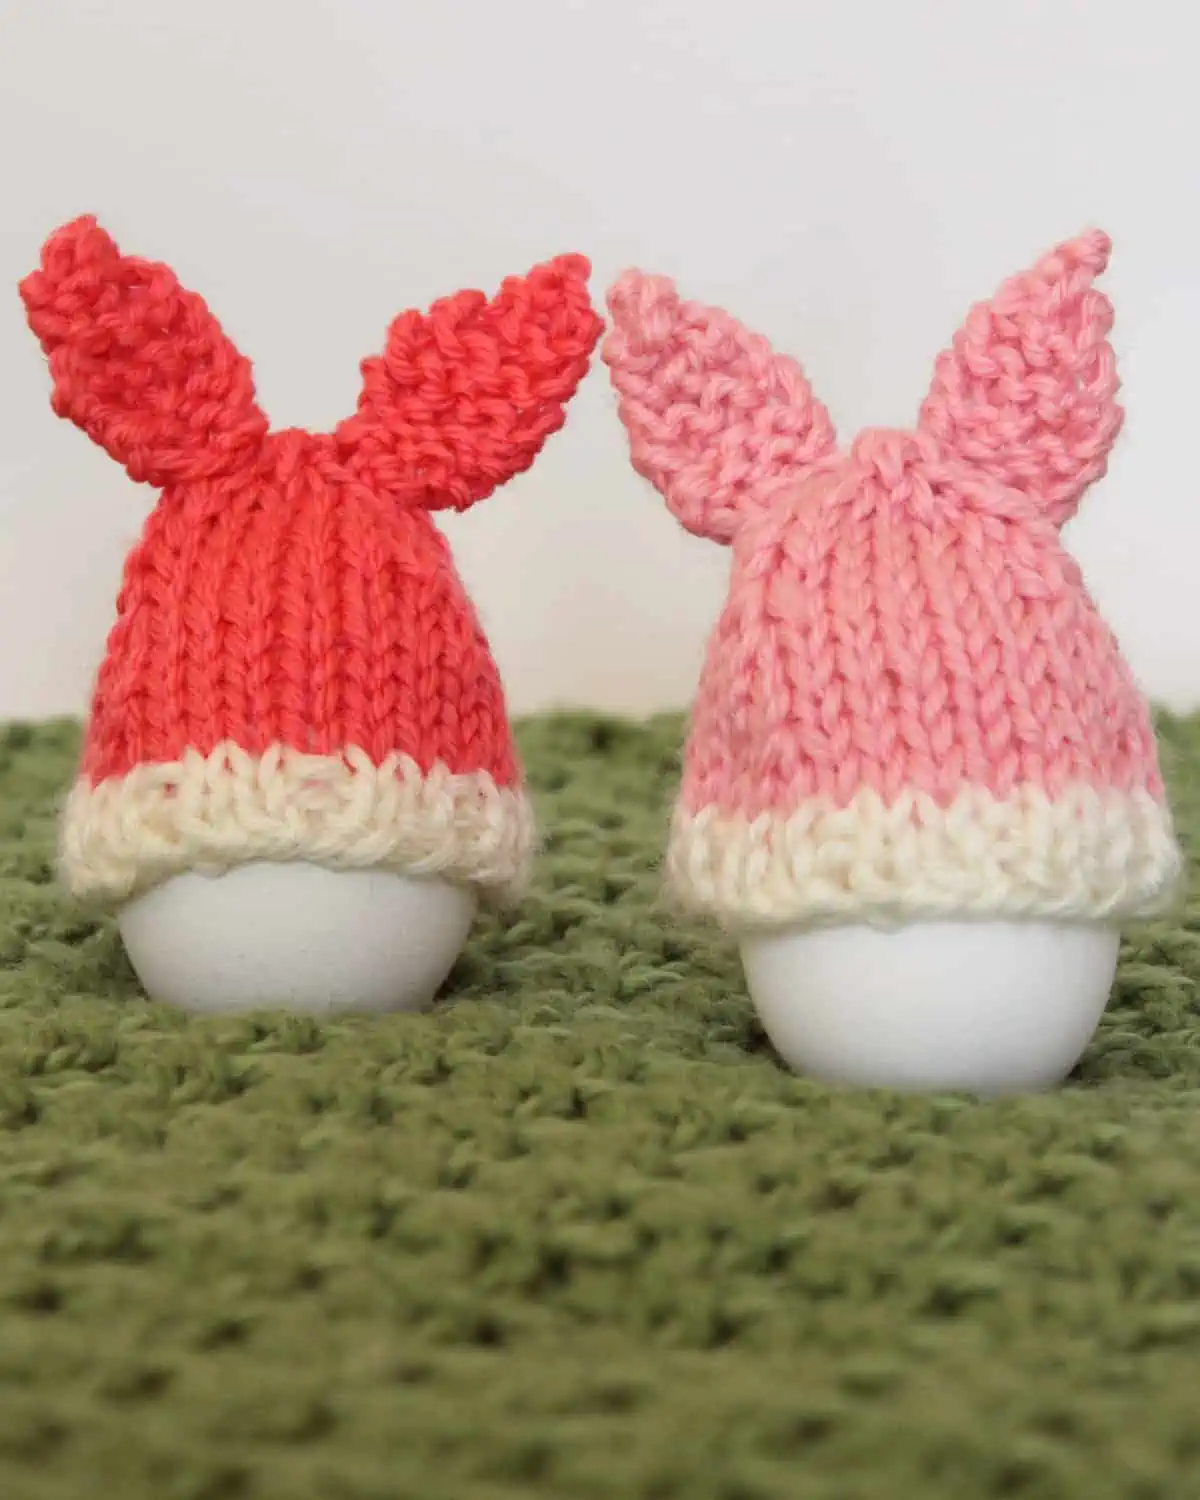 Knitted Bunny Egg Cozies in peach and pink yarn colors.